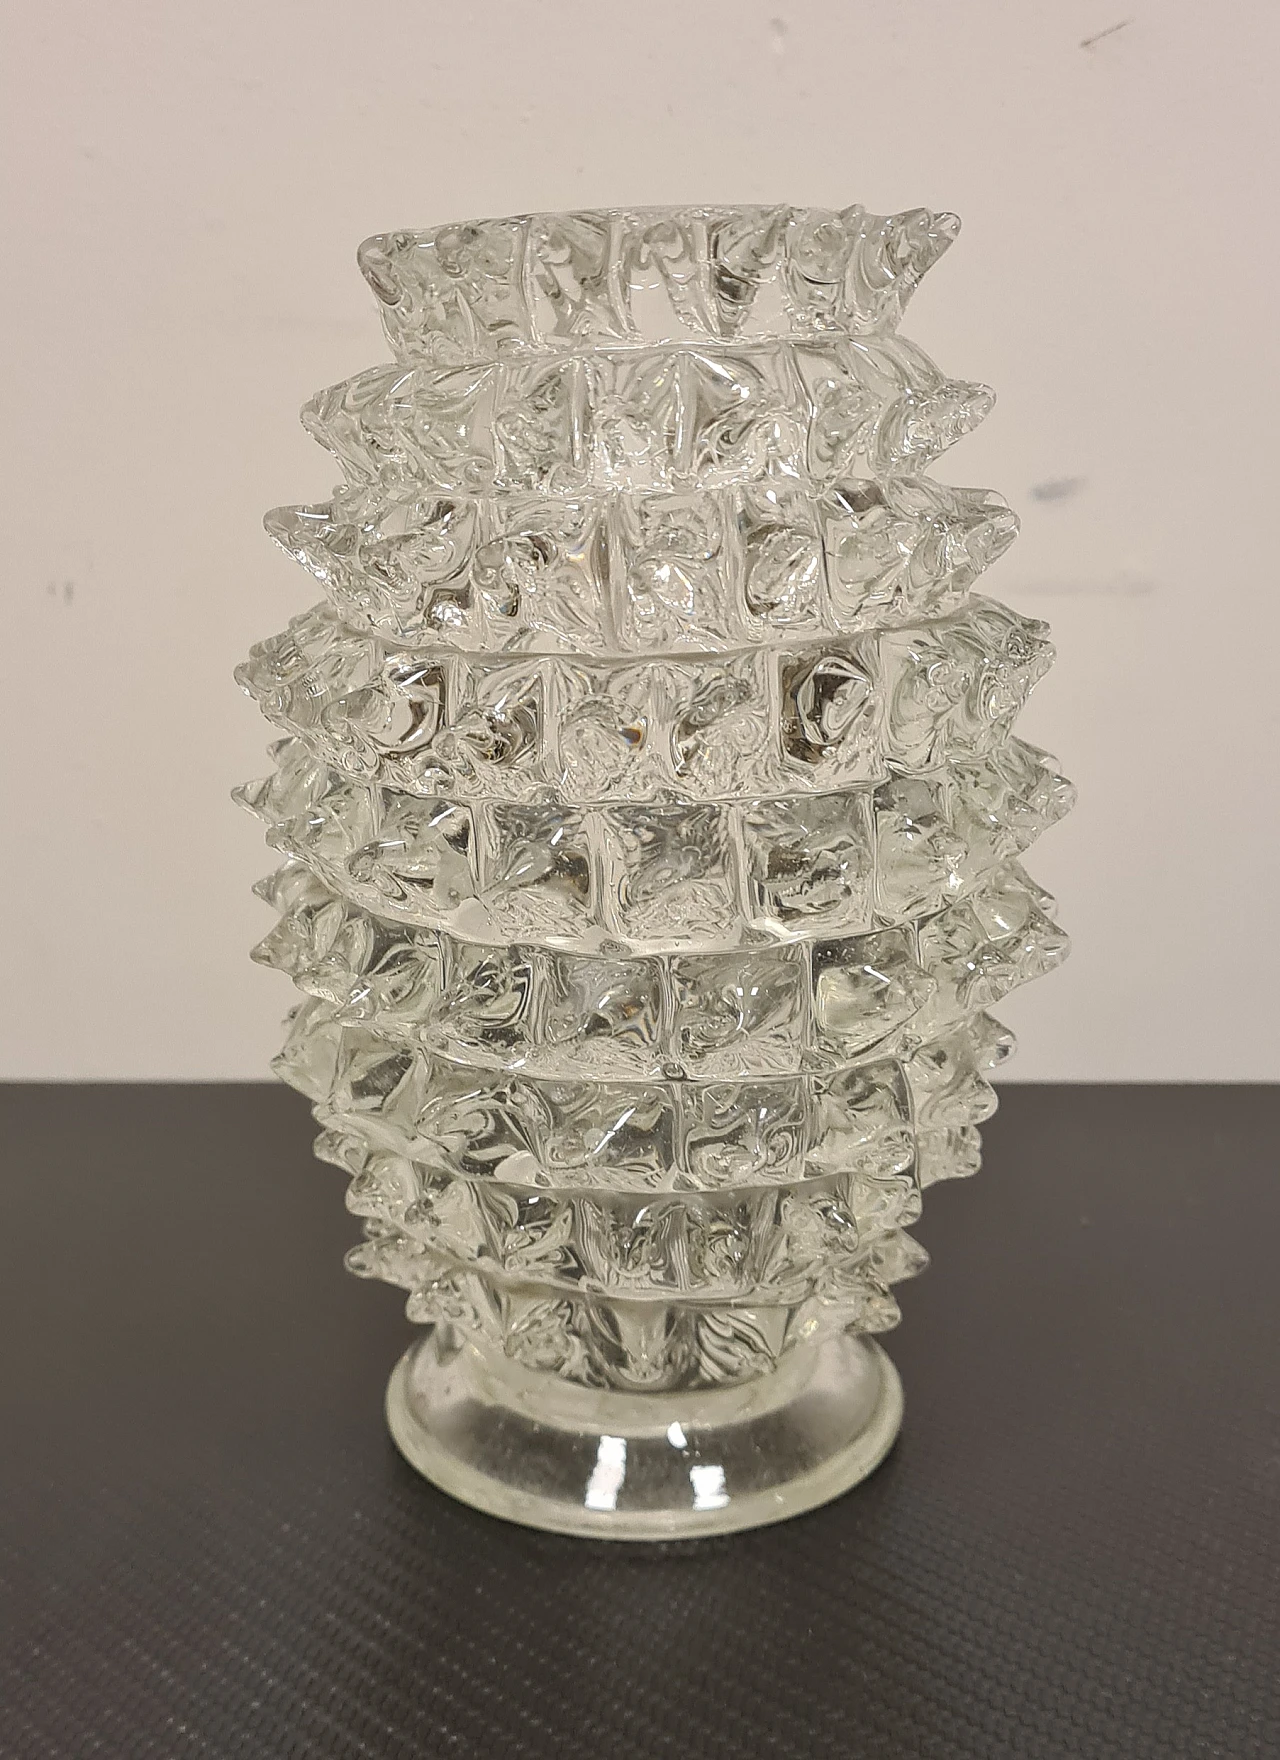 Rostered Murano glass vase by Barovier and Toso, 1940s 22